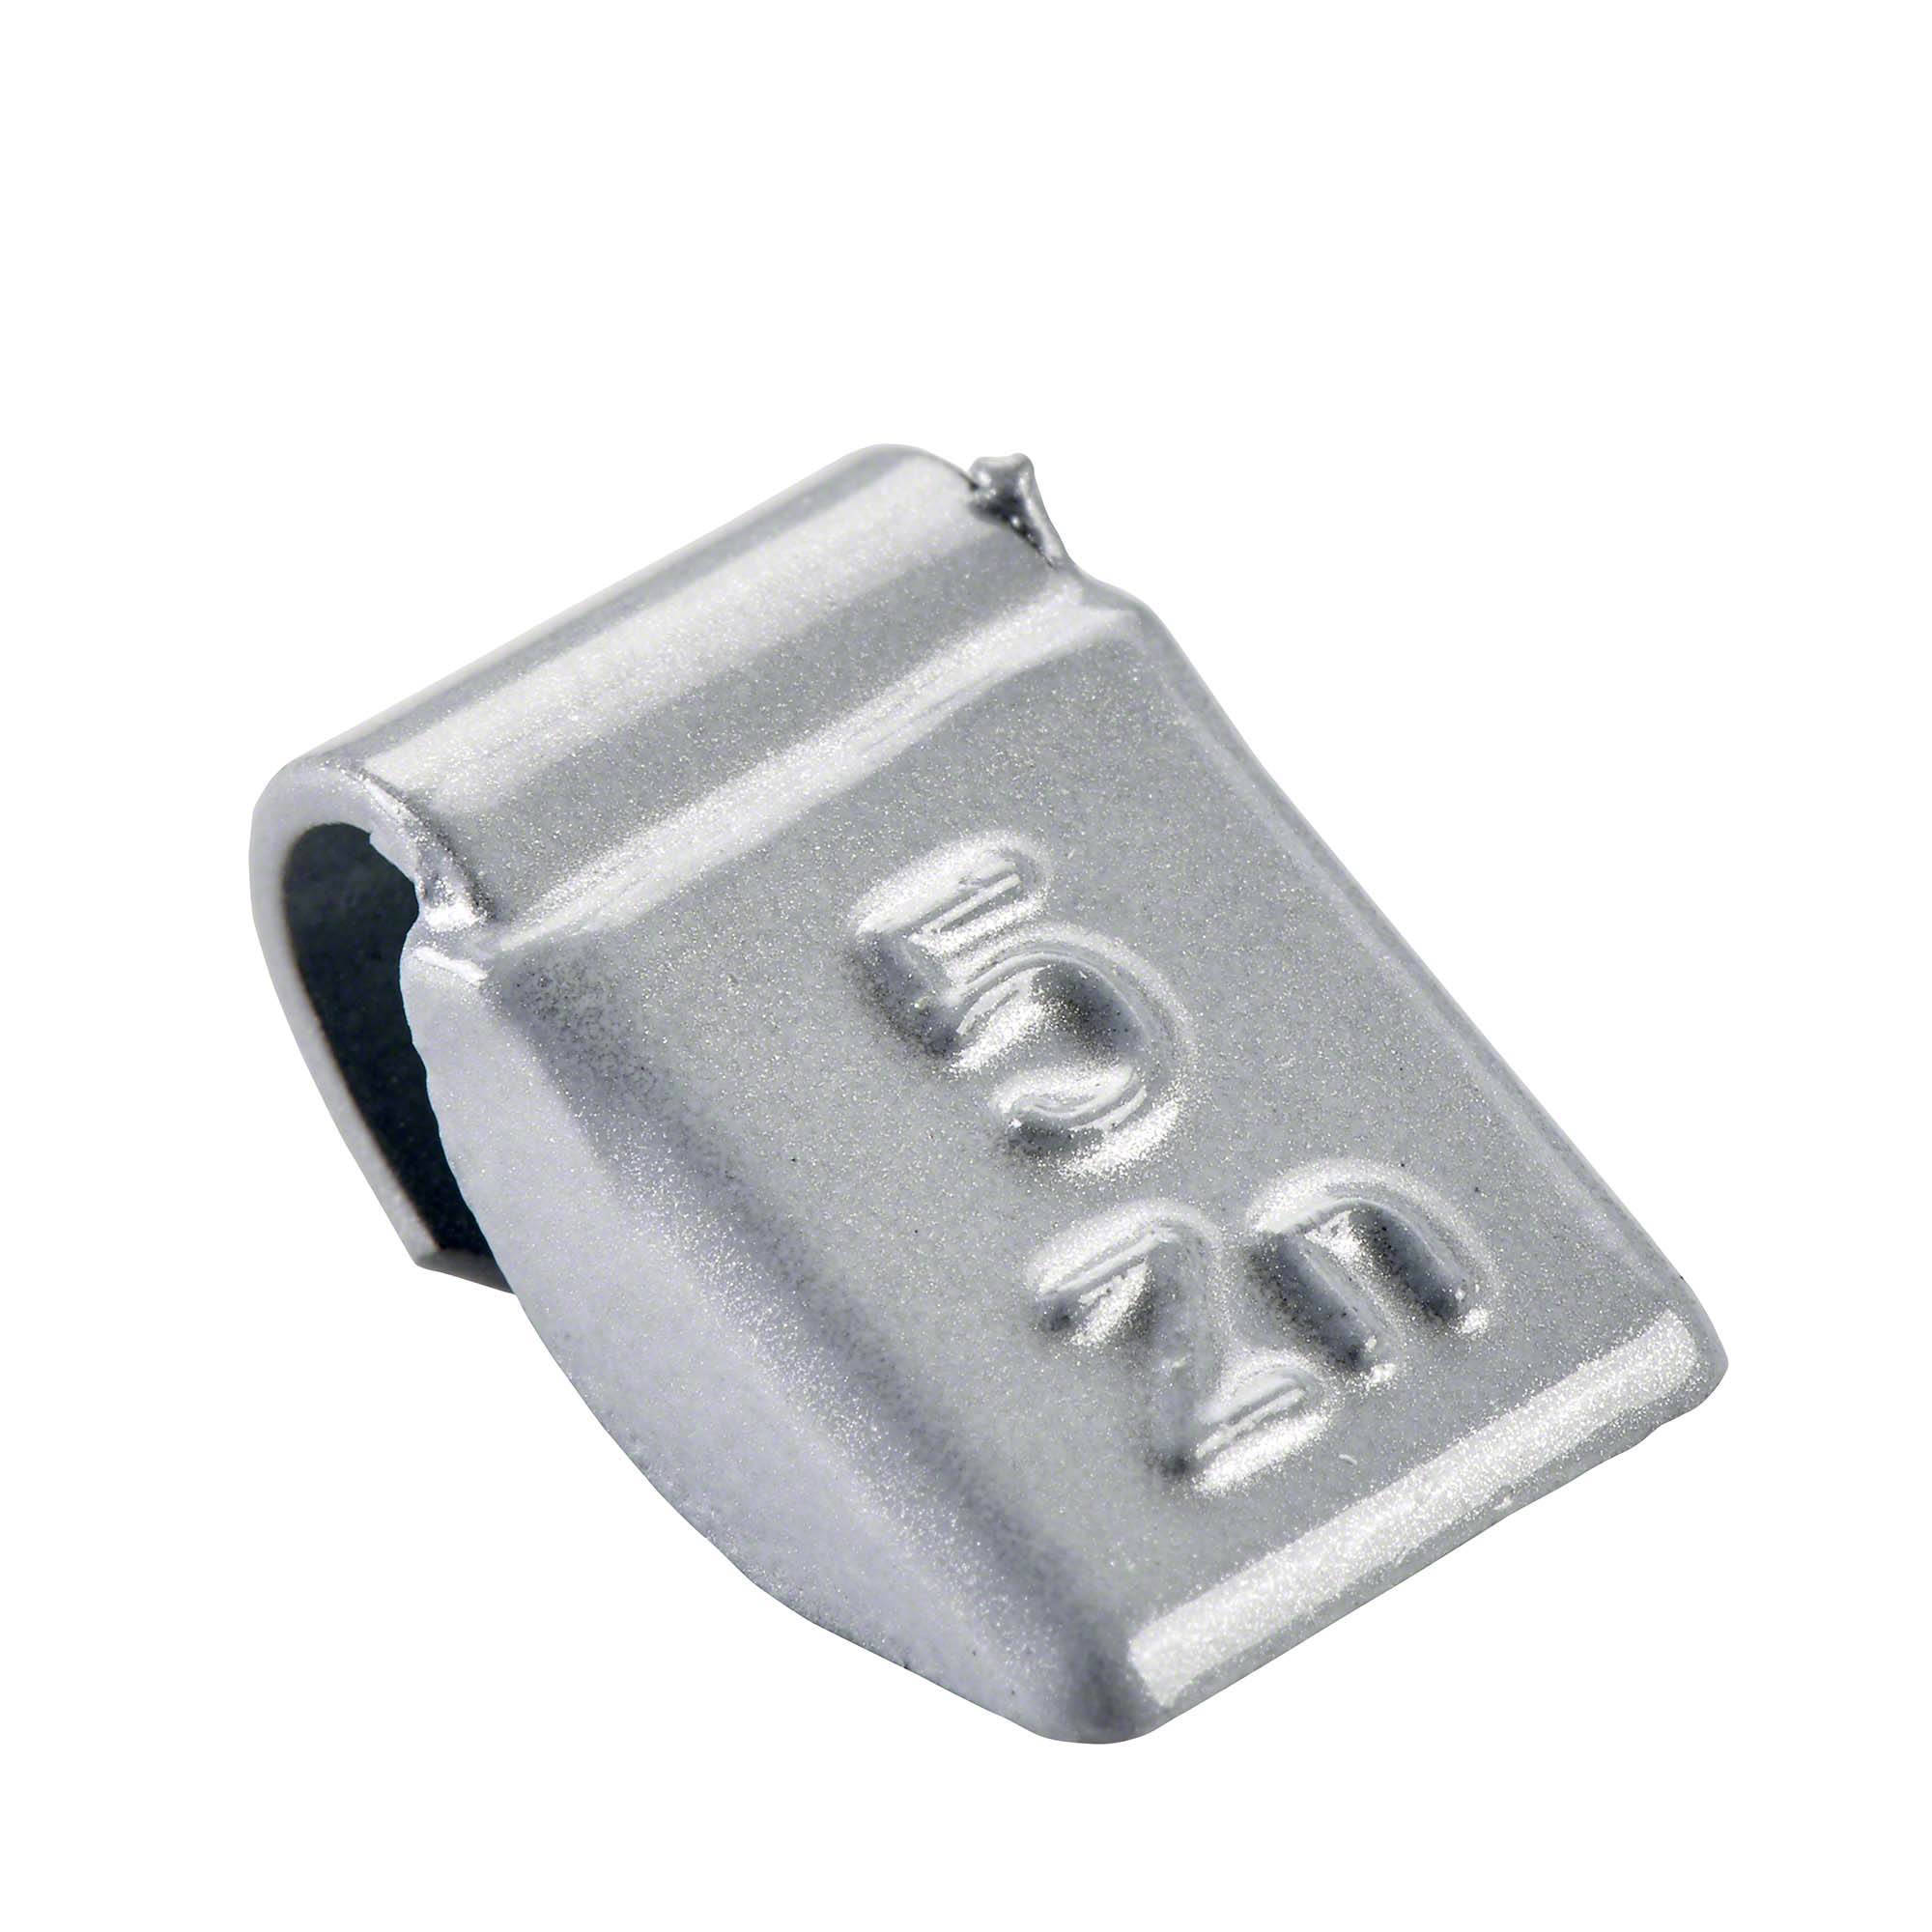 knock-on weight - Typ 84, 5 g, zinc, silver